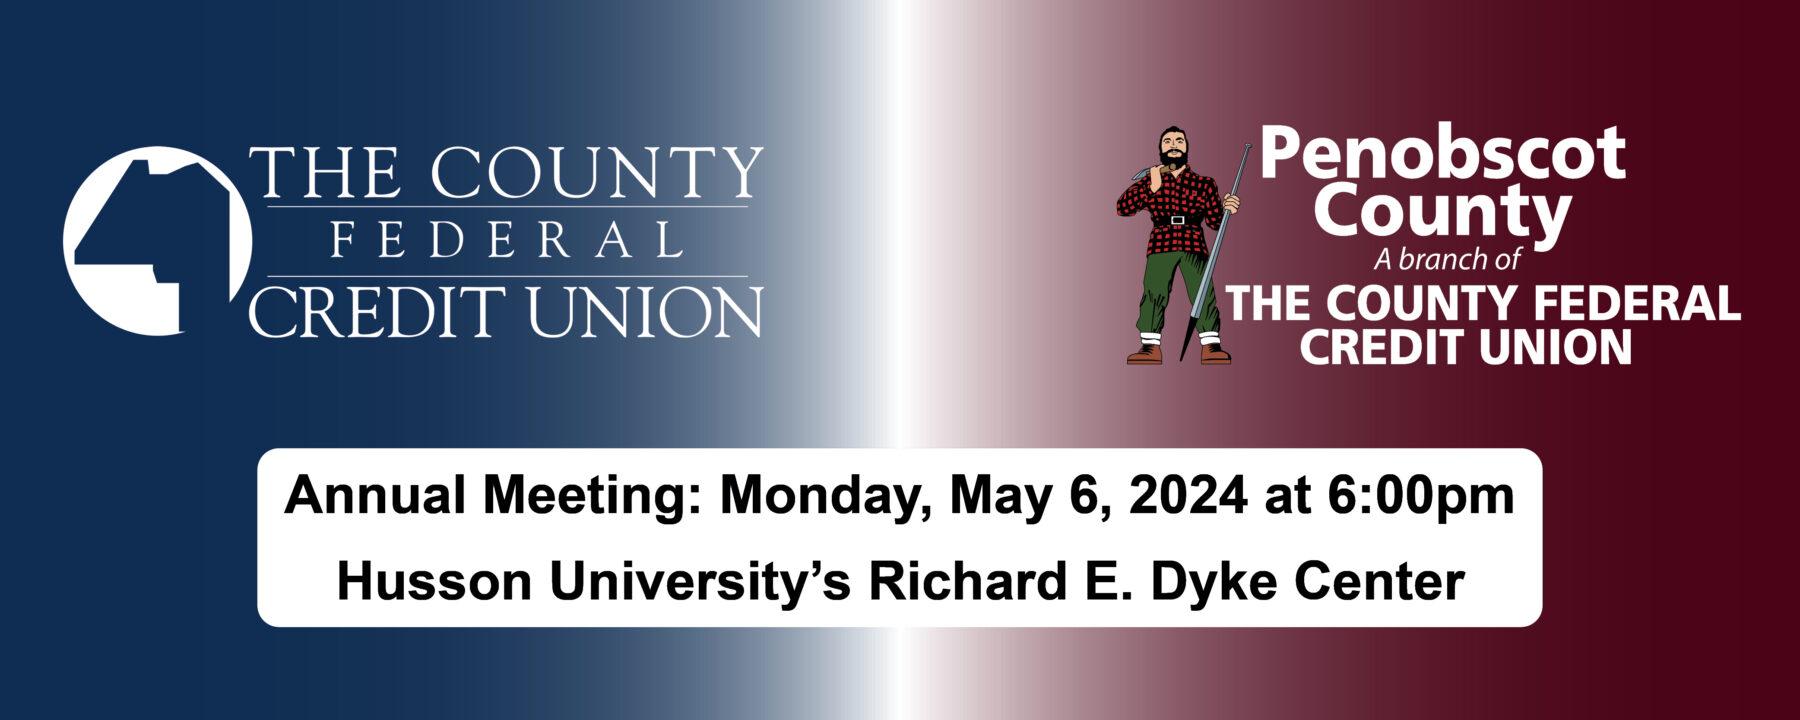 Annual Meeting on 5/6/24 at 6:00PM